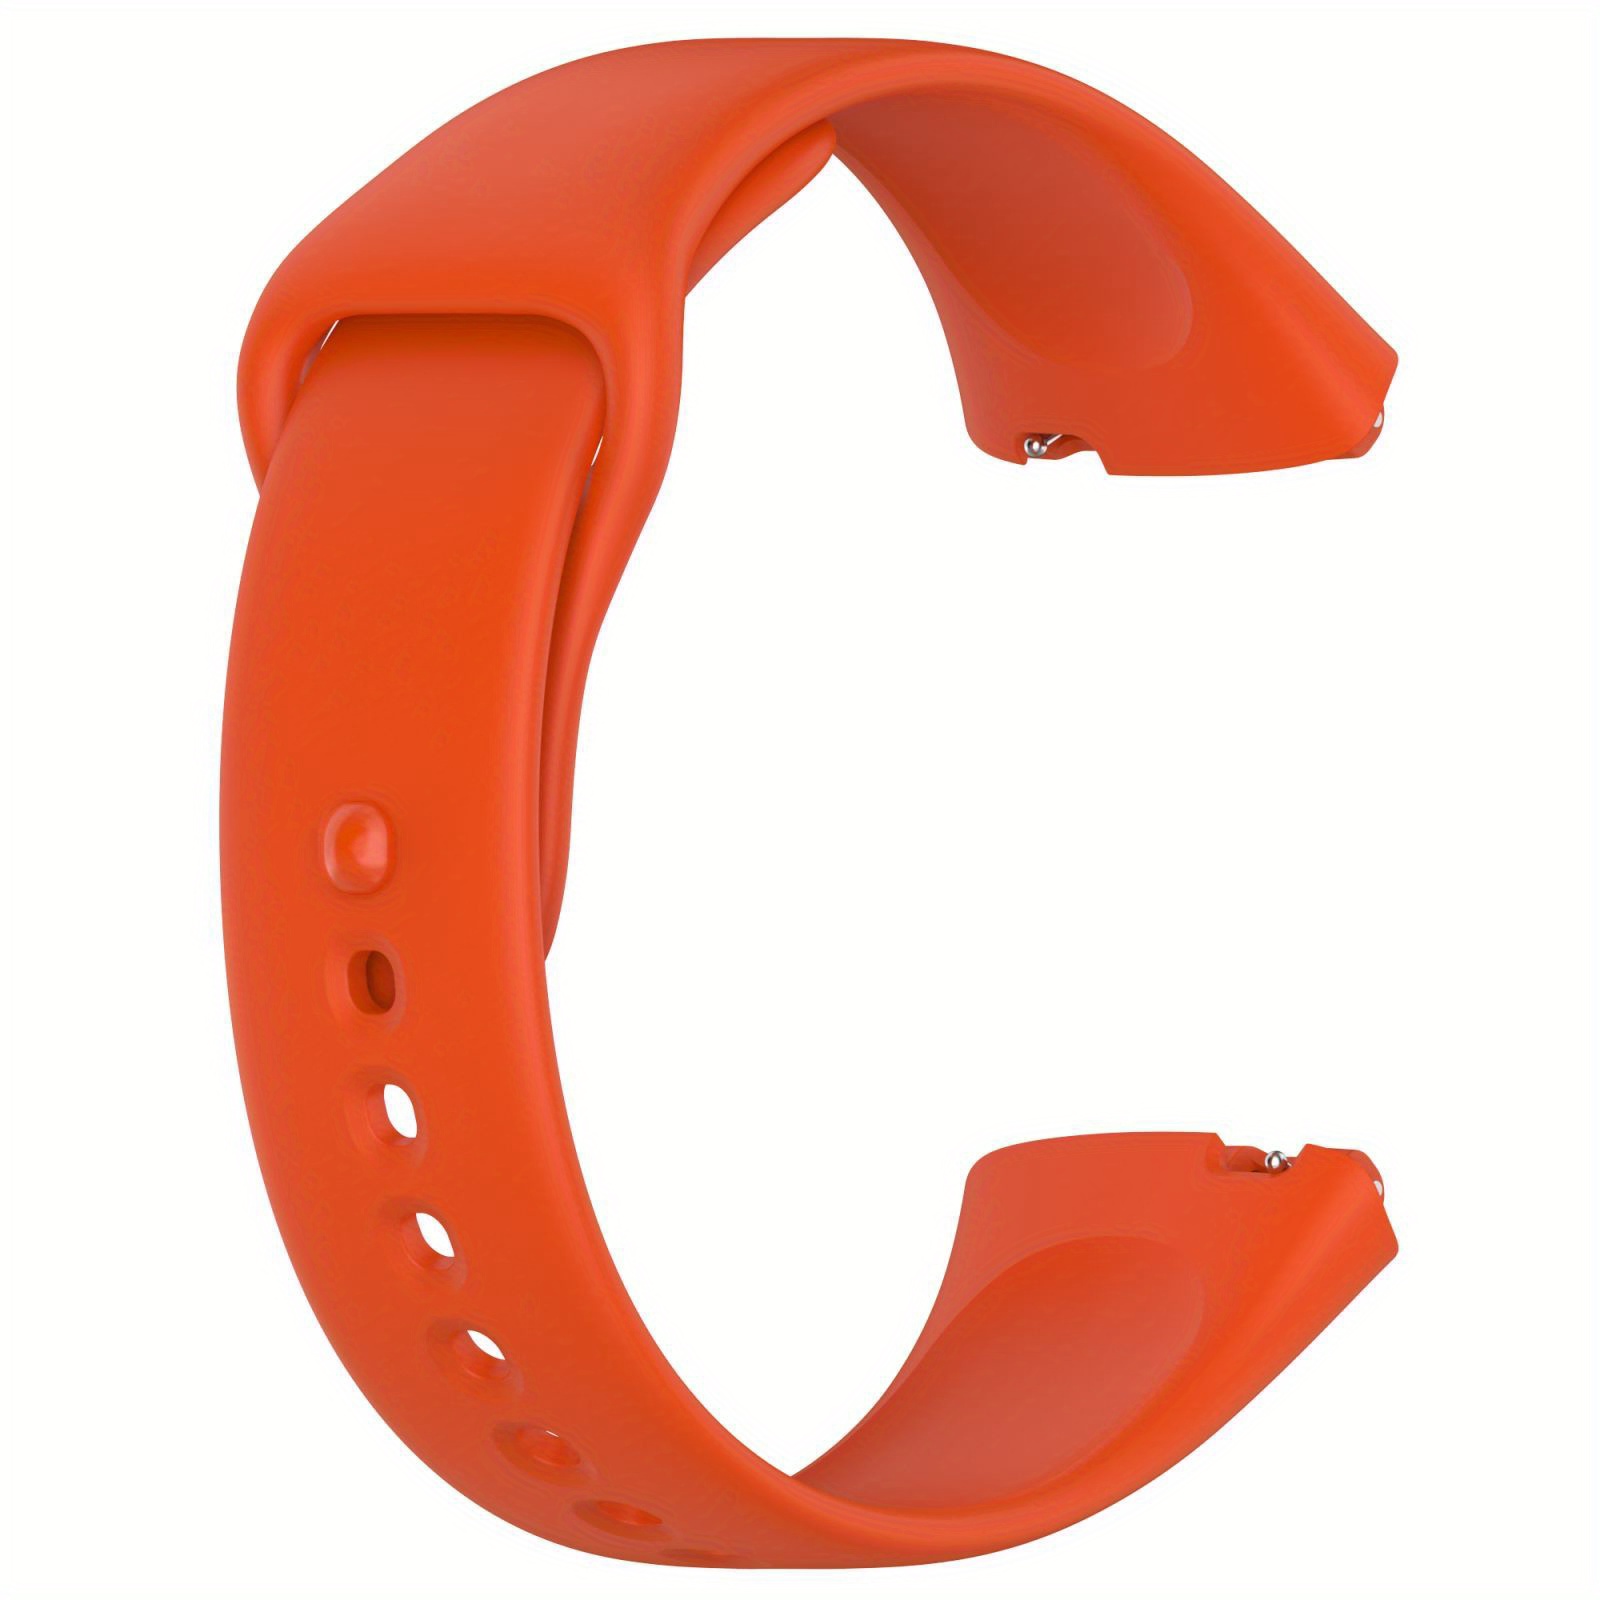 Silicone Strap For Redmi Watch 3 Active Replacement Wristband